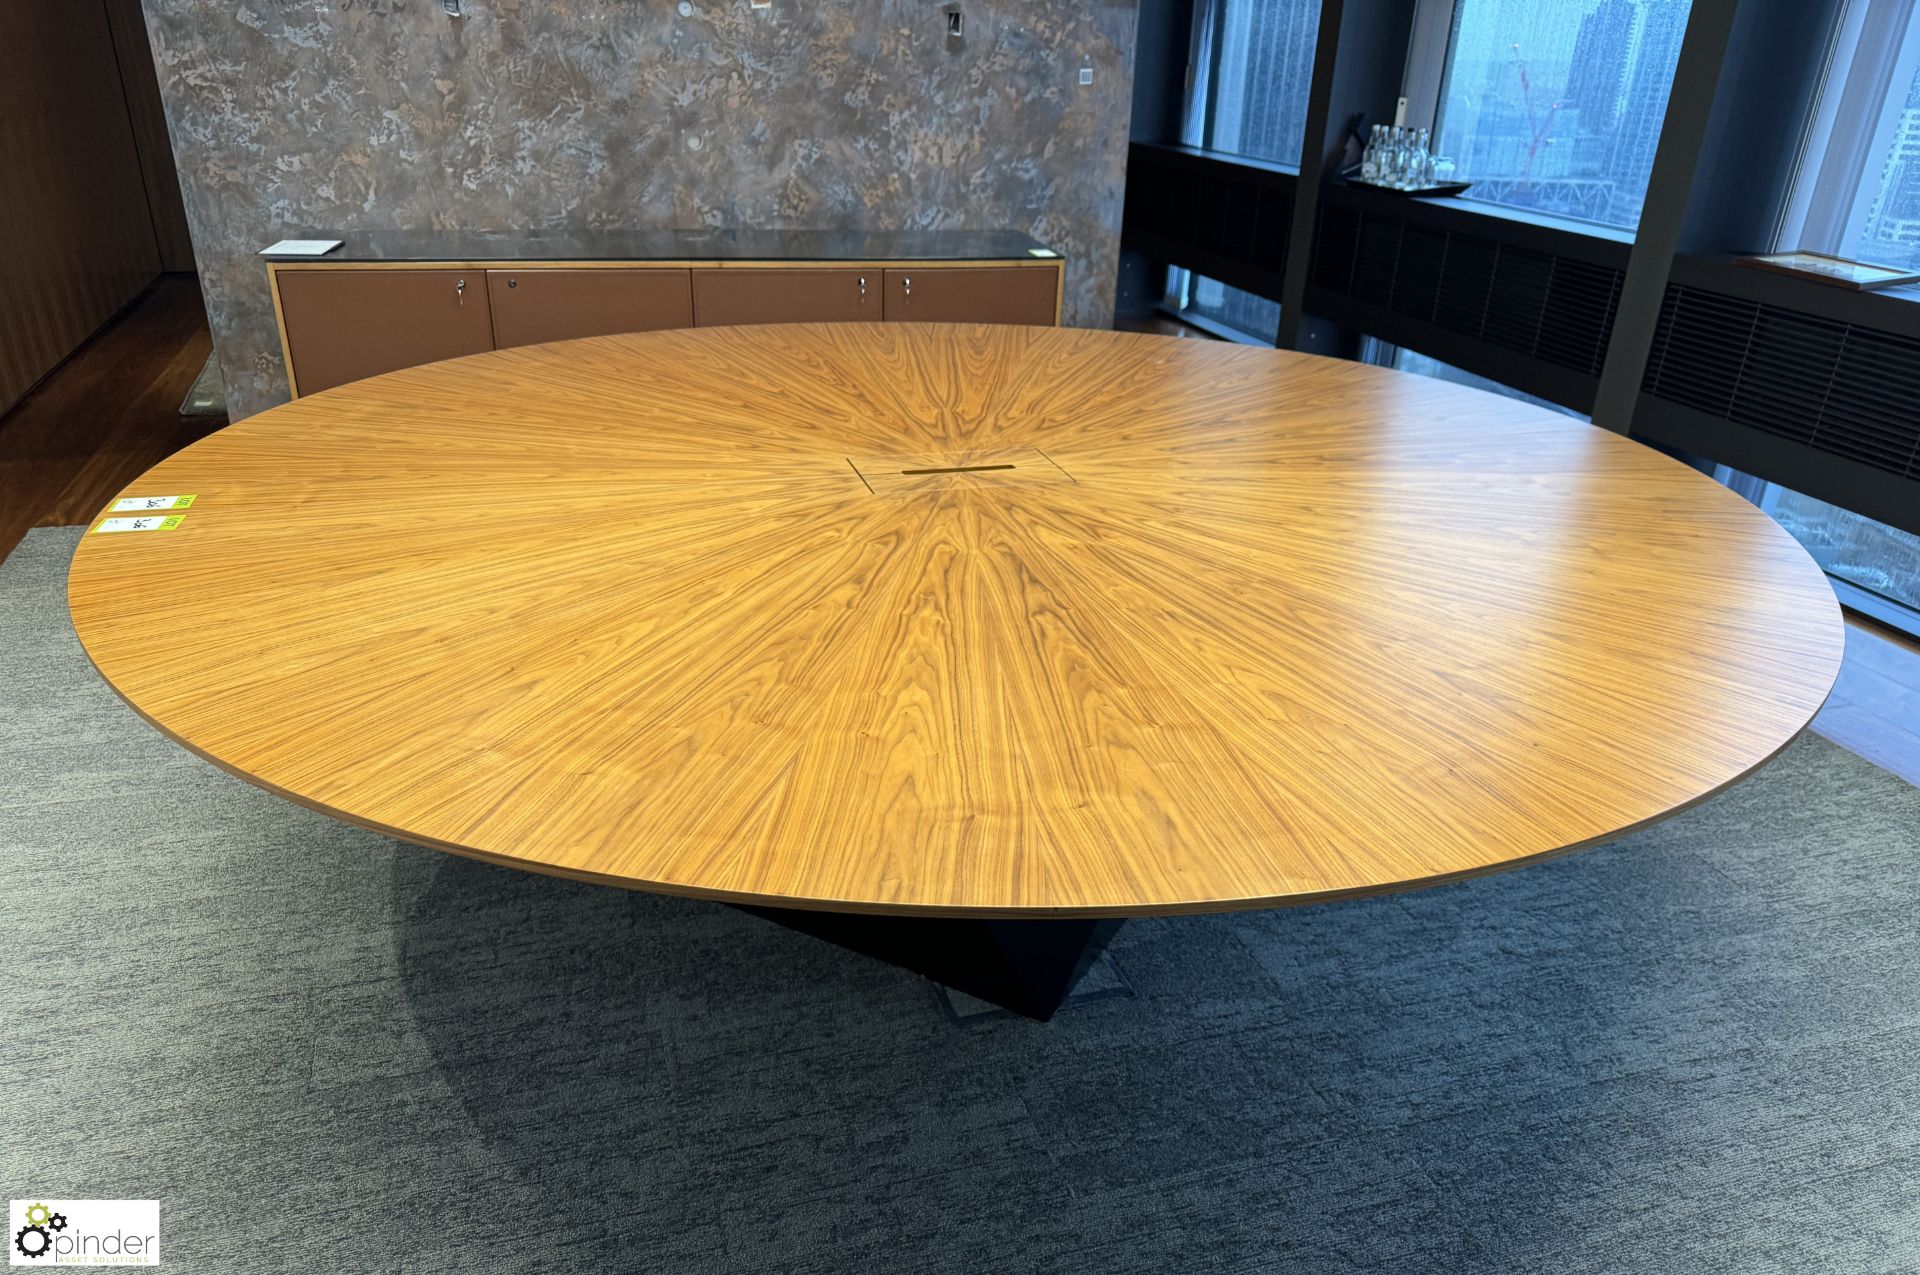 Cherry veneer circular Meeting Table, 2600mm diameter x 800mm, with cable management and central - Image 5 of 7